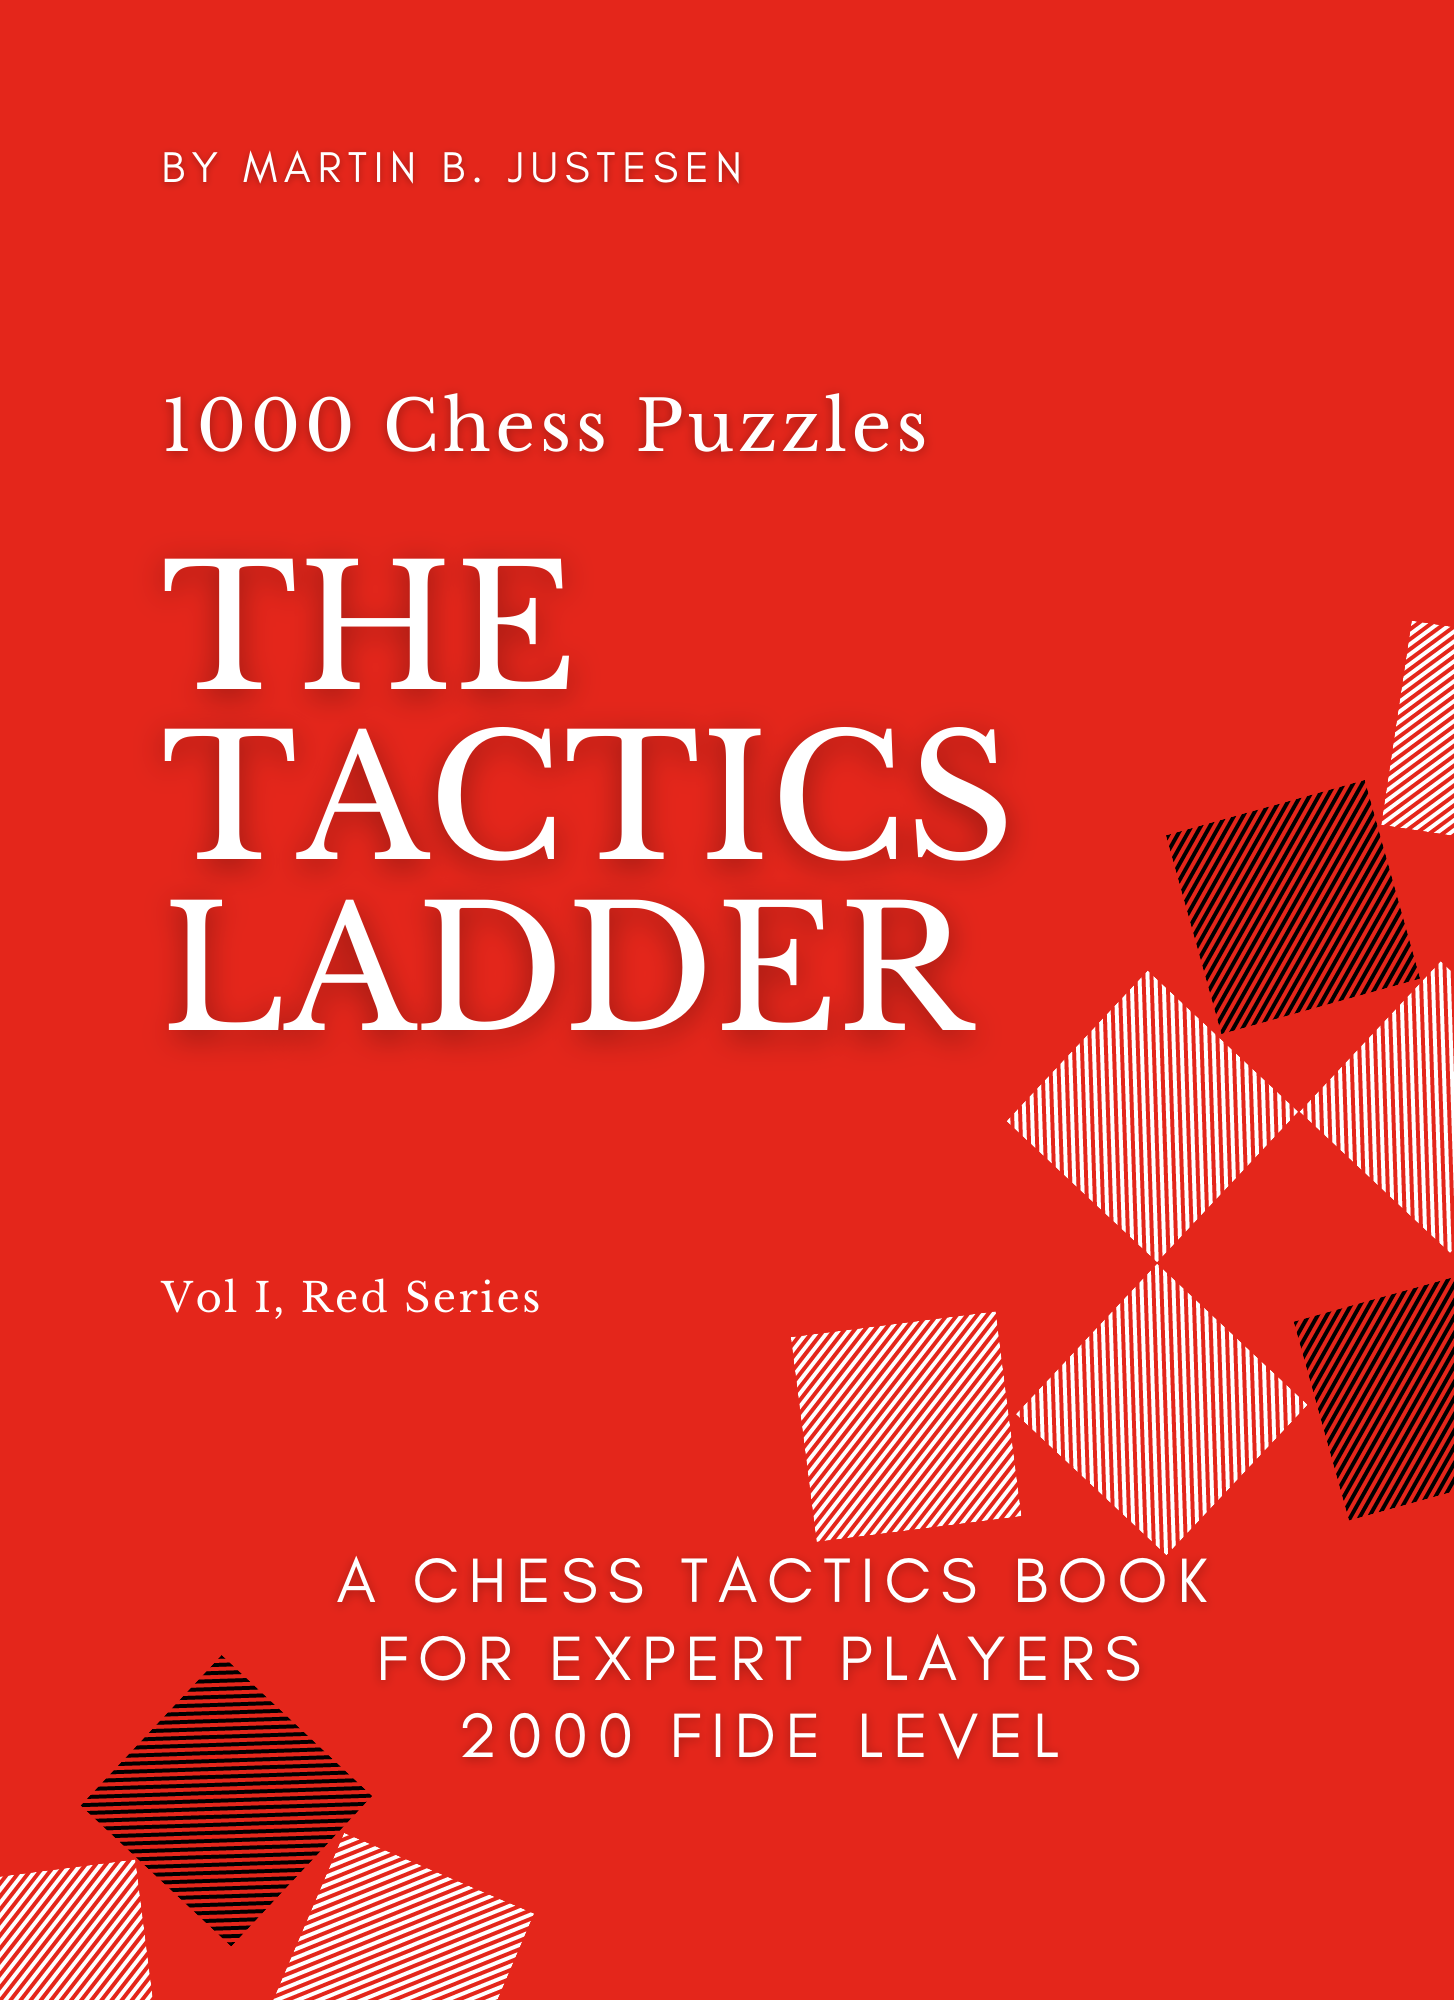 The Tactics Ladder — A Chess Tactics Book For Expert Players (2000 FIDE Level)